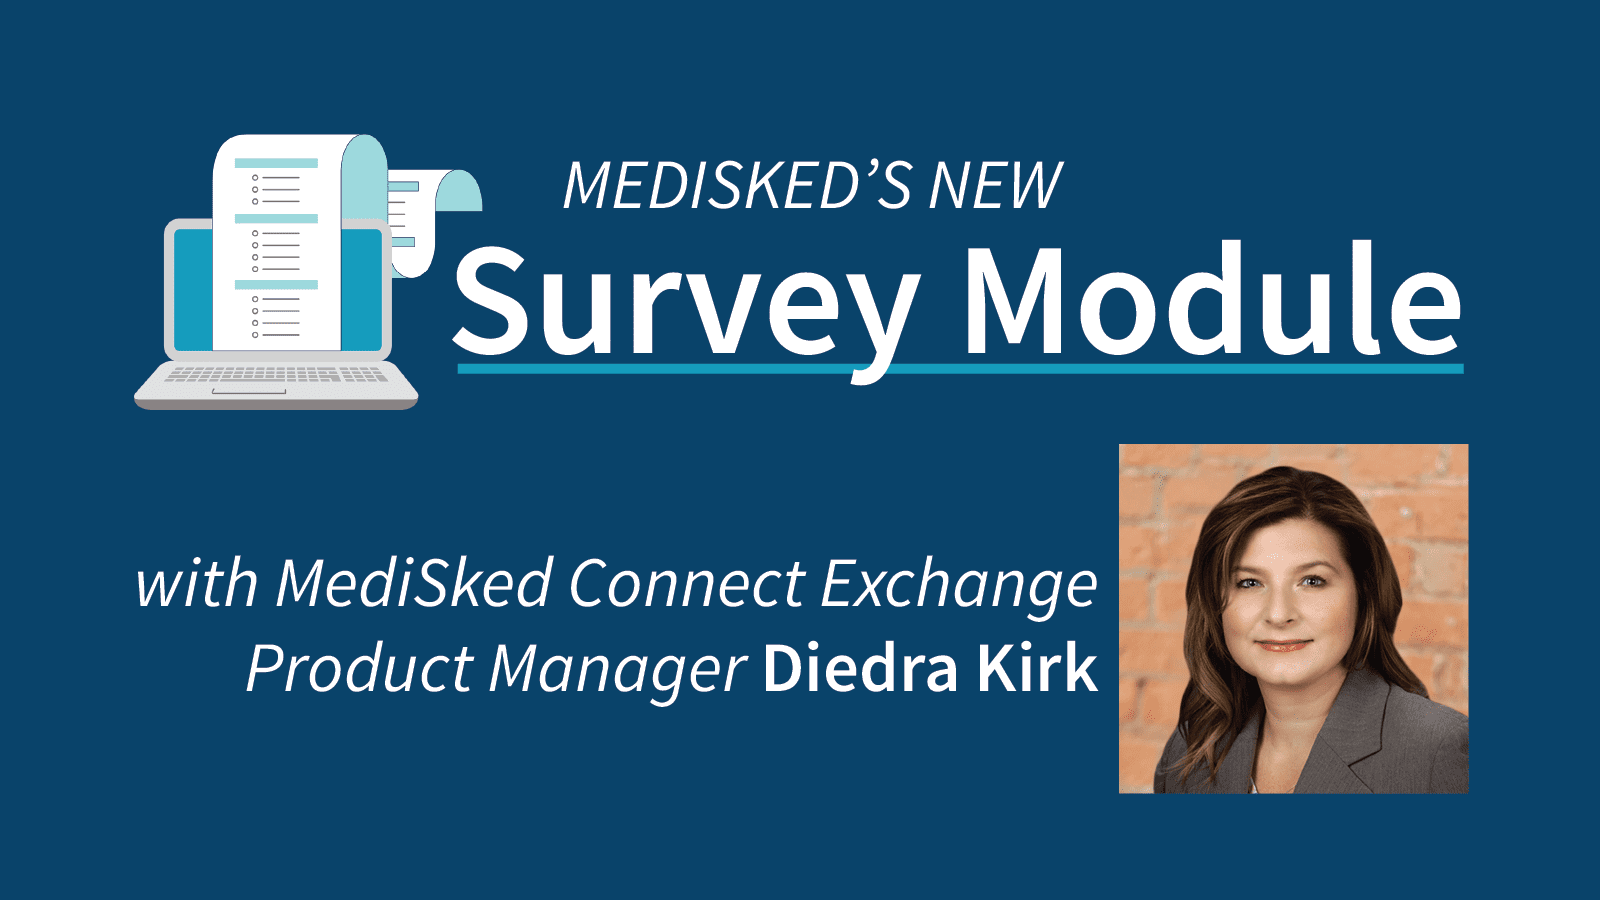 MediSked's New Survey Module with MediSked Connect Exchange Product Manager Diedra Kirk